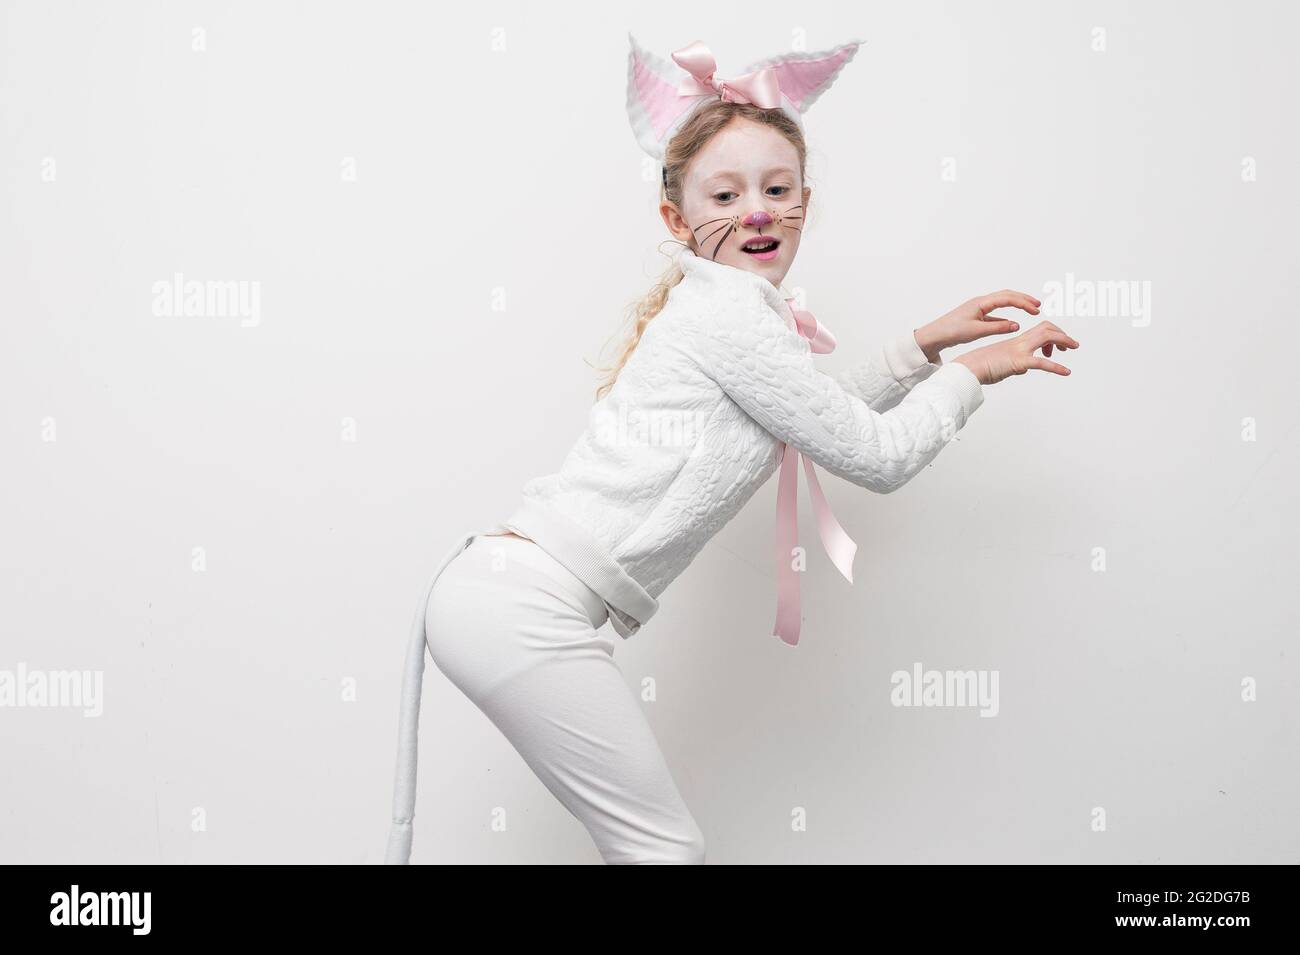 A young girl dressed up in a cat costume for world book day. Stock Photo